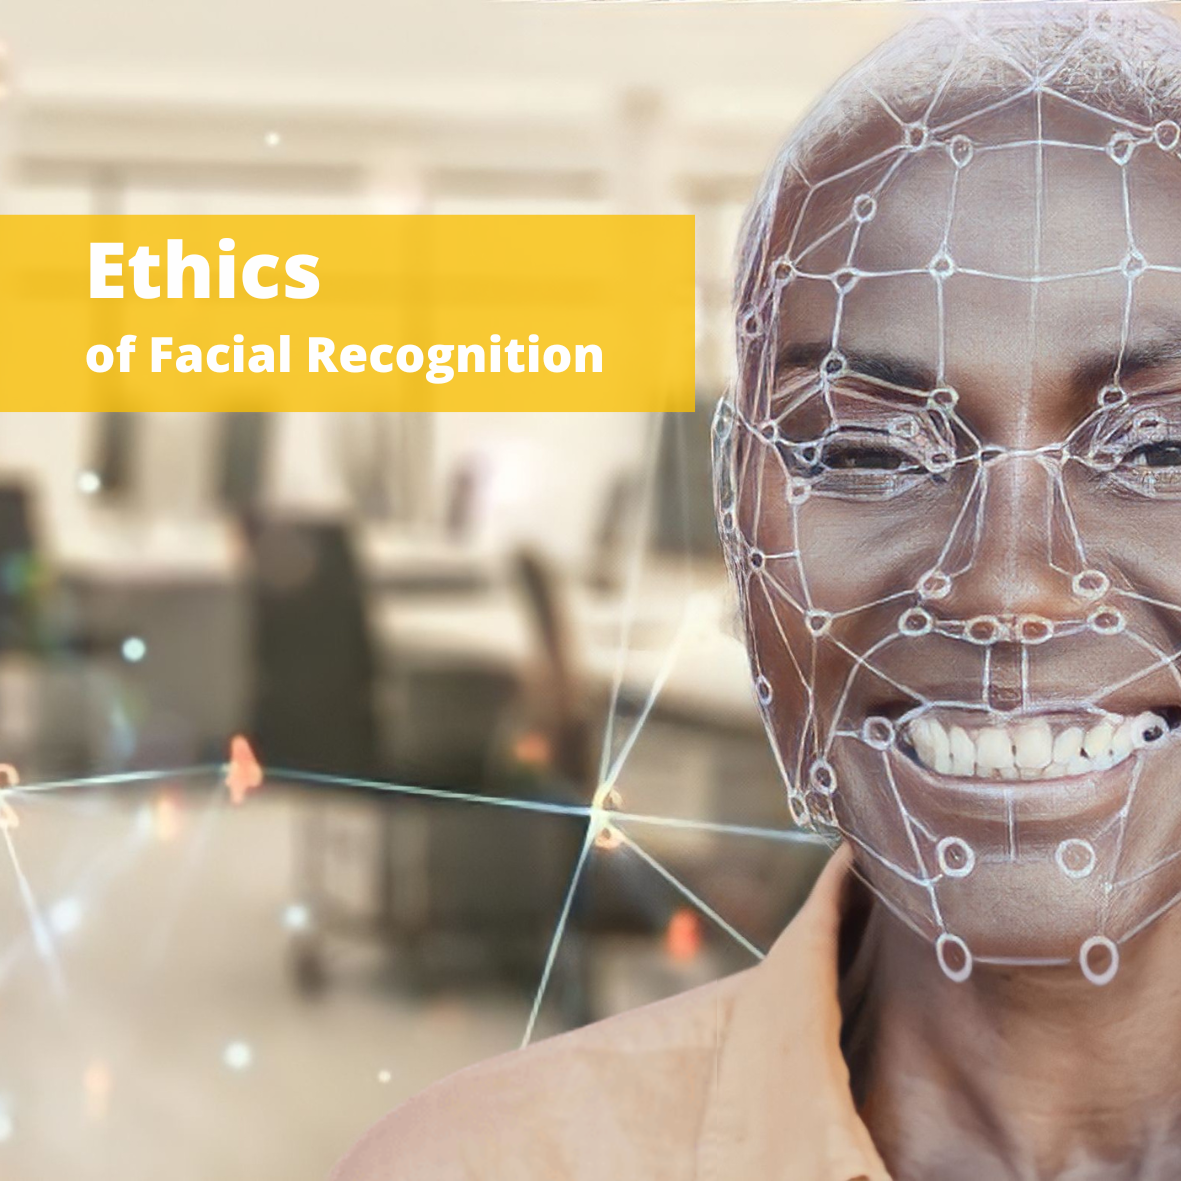 Ethics of facial recognition: Herta’s Case